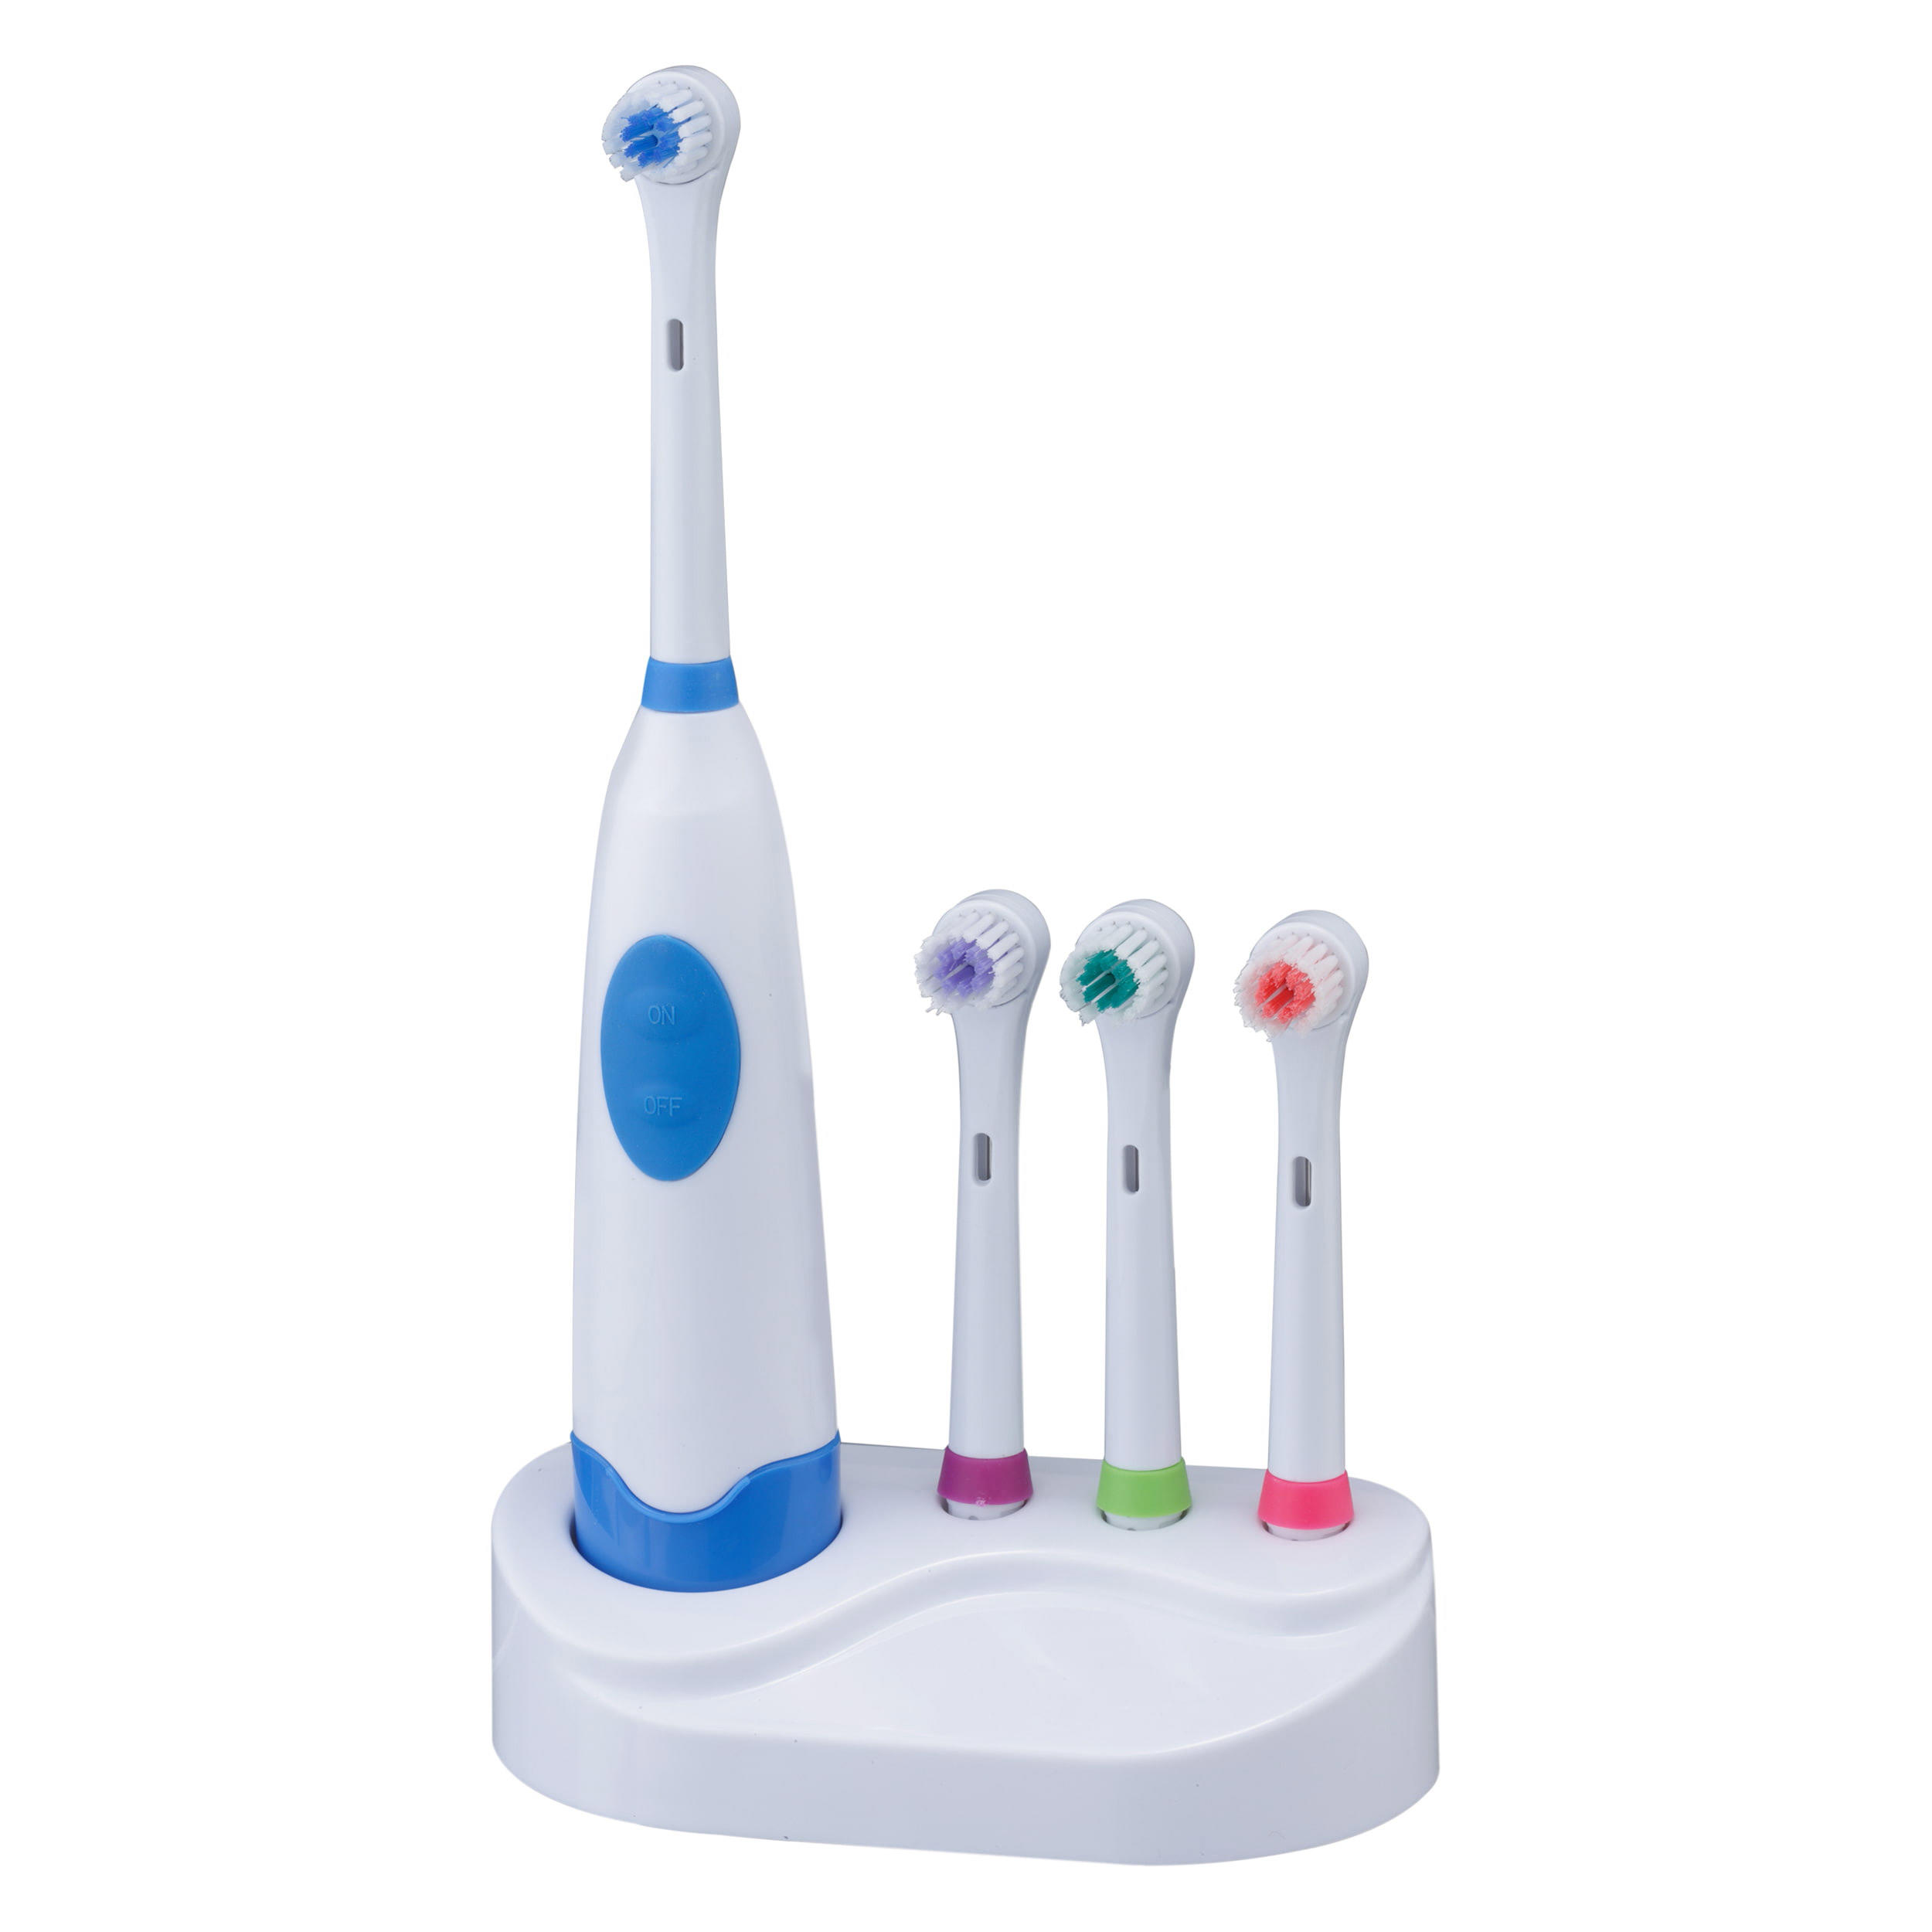 KHET003-3 Electric Battery Toothbrush Perfect For Teeth Whitening And Cleaning With Three Refill Brush Heads Family Kit 